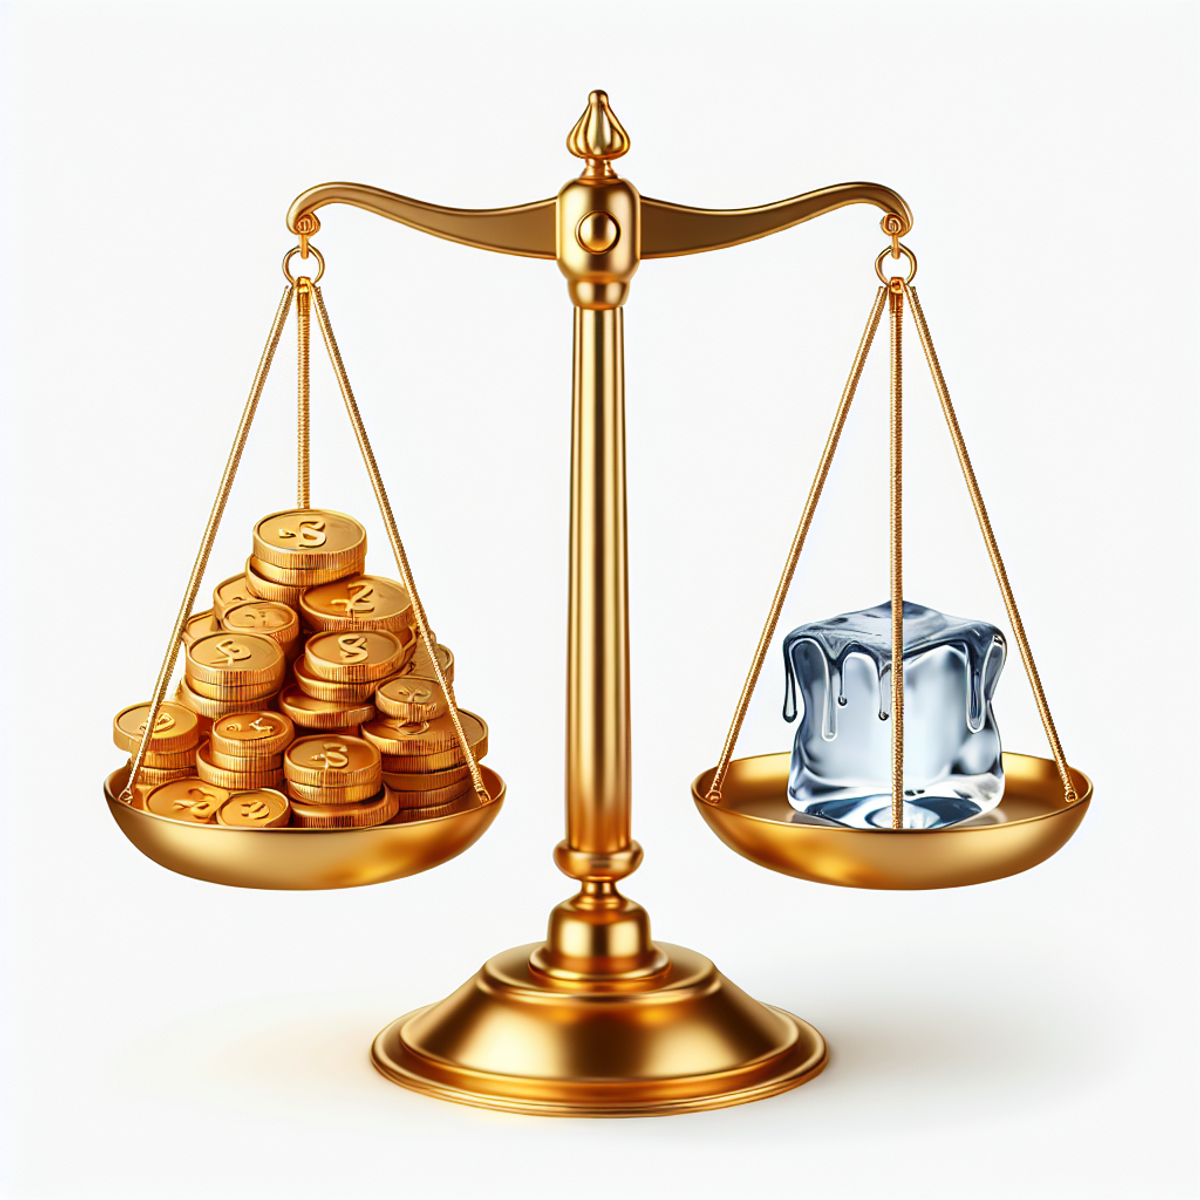 A golden scale with one pan holding a heap of gold coins and the other holding a melting ice cube, perfectly balanced.